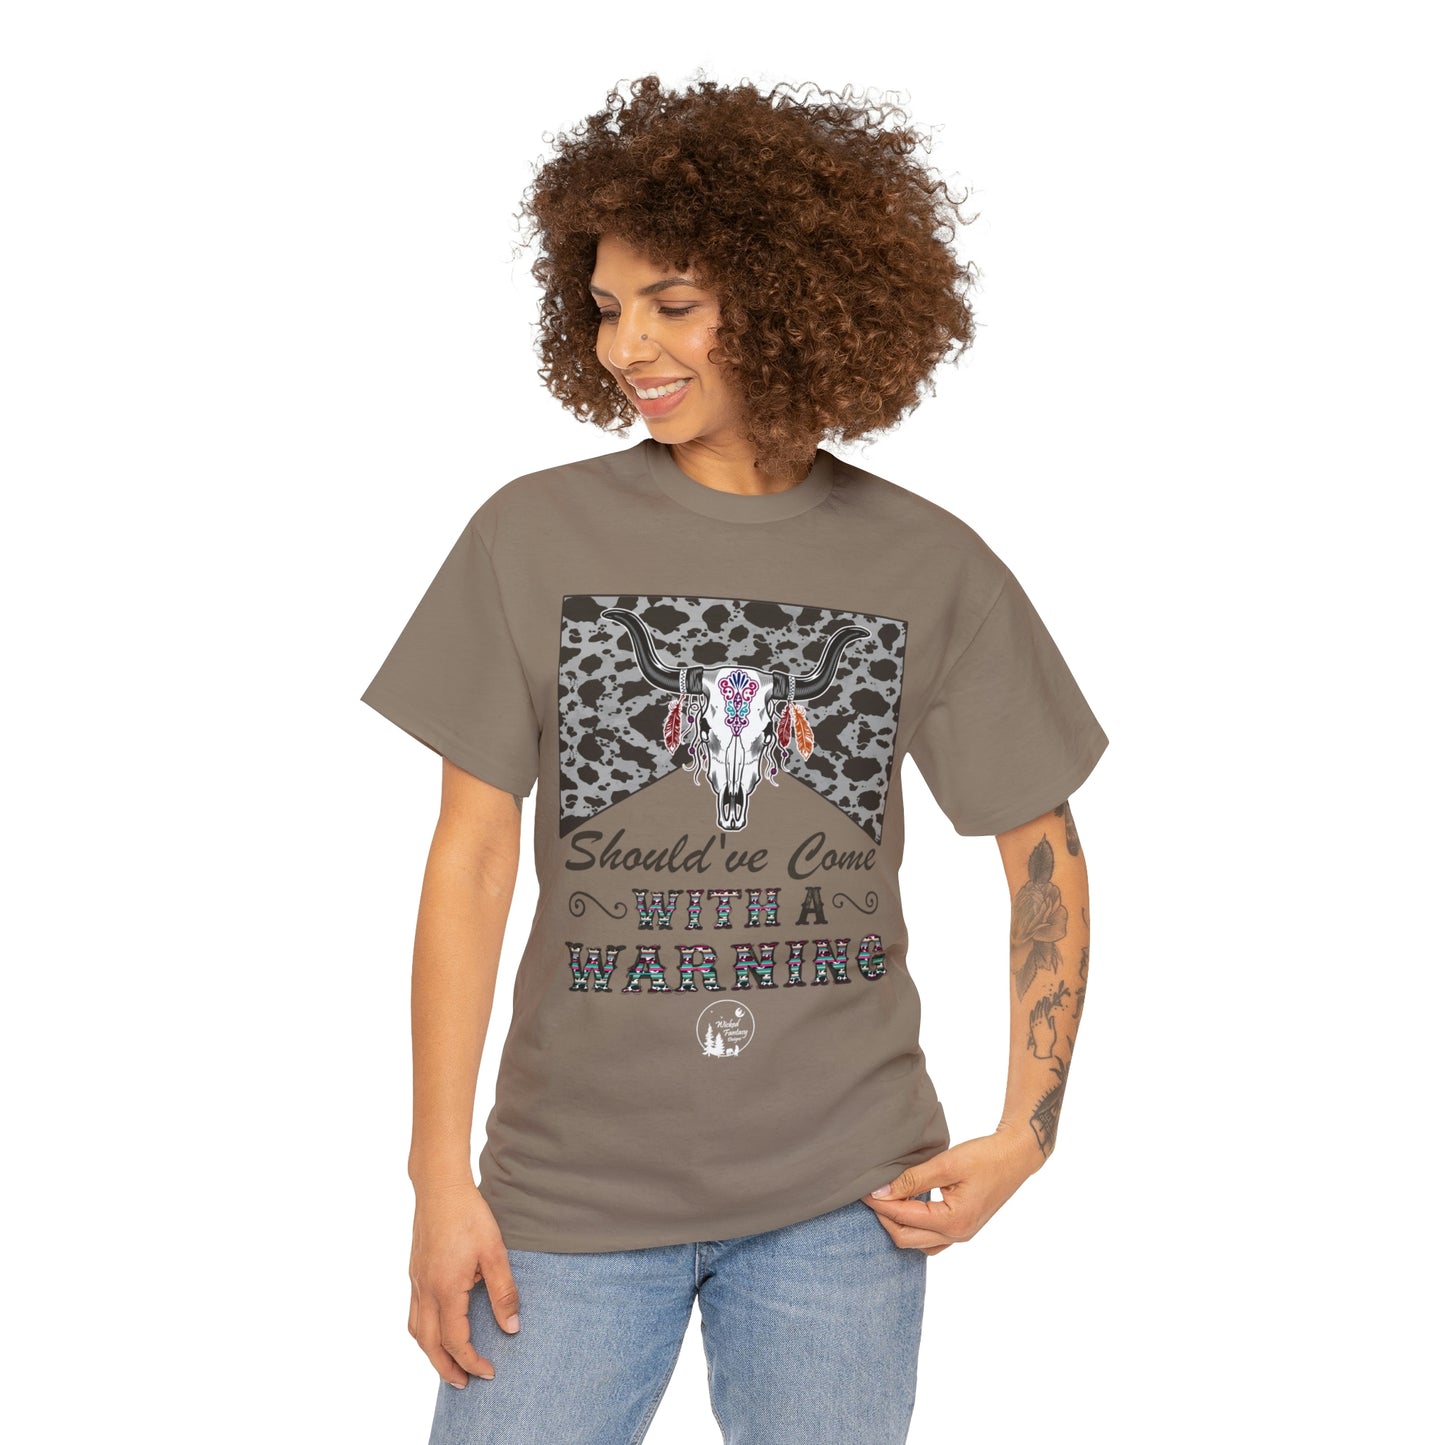 Should Have Come With A Warning Cow Hide Leopard Serape Western Boho Heavy Cotton Tee